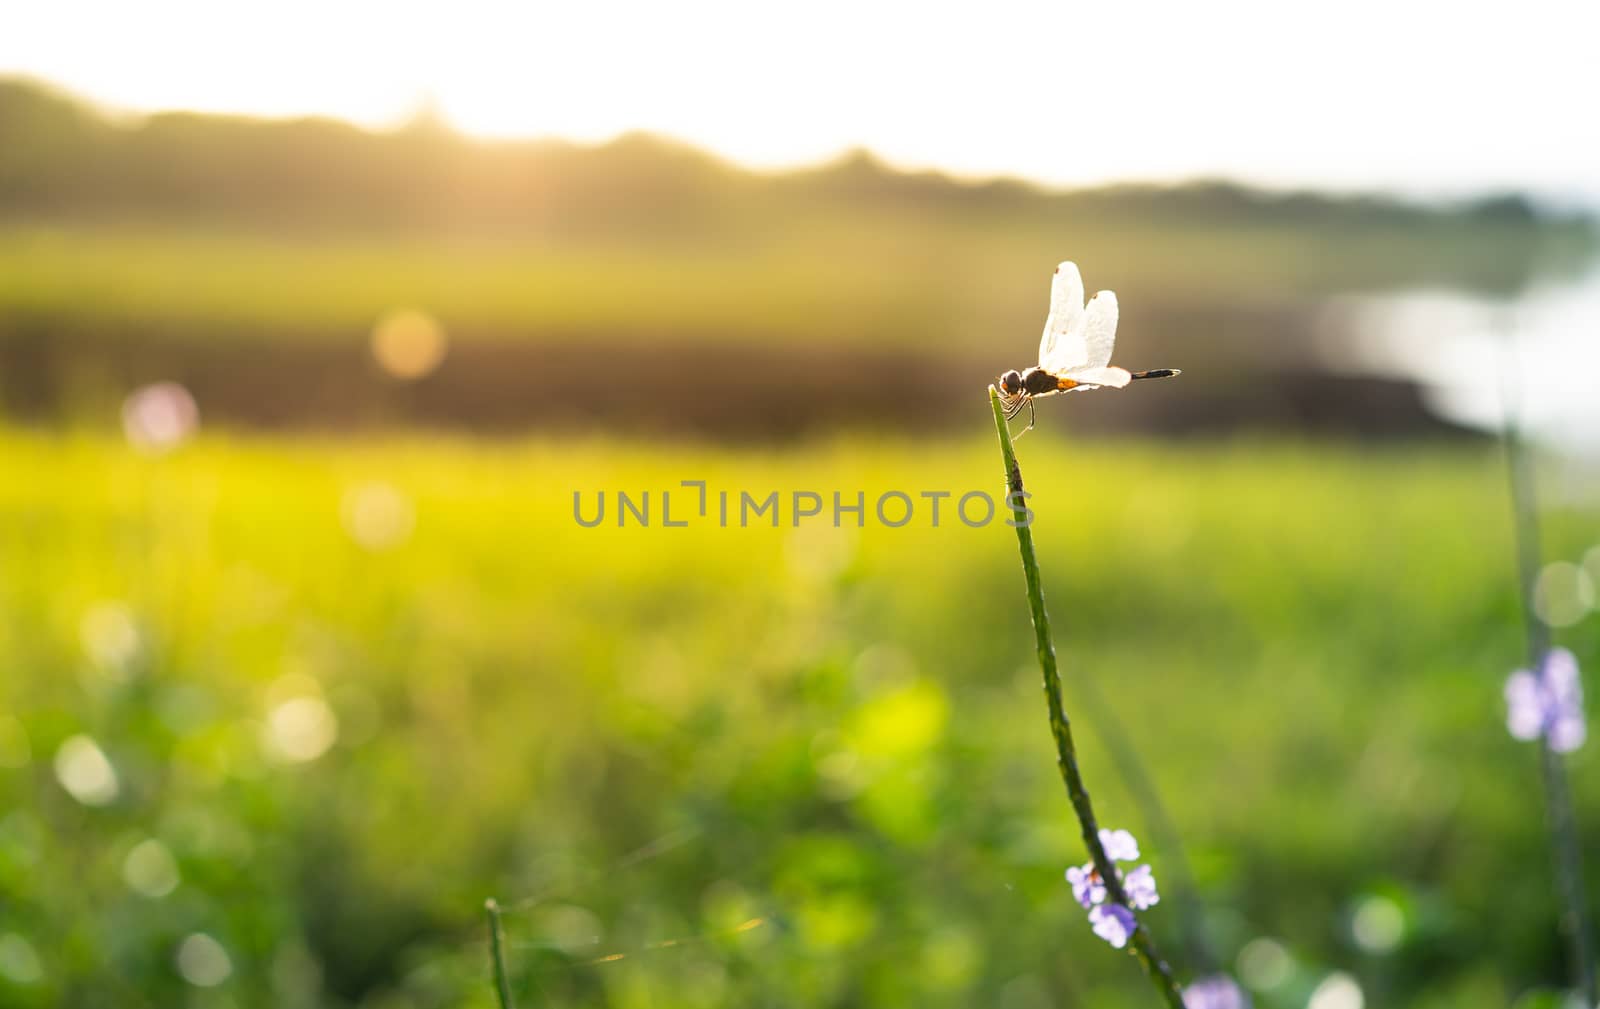 Dragonfly on the grass flower in the green field with sunlight by domonite